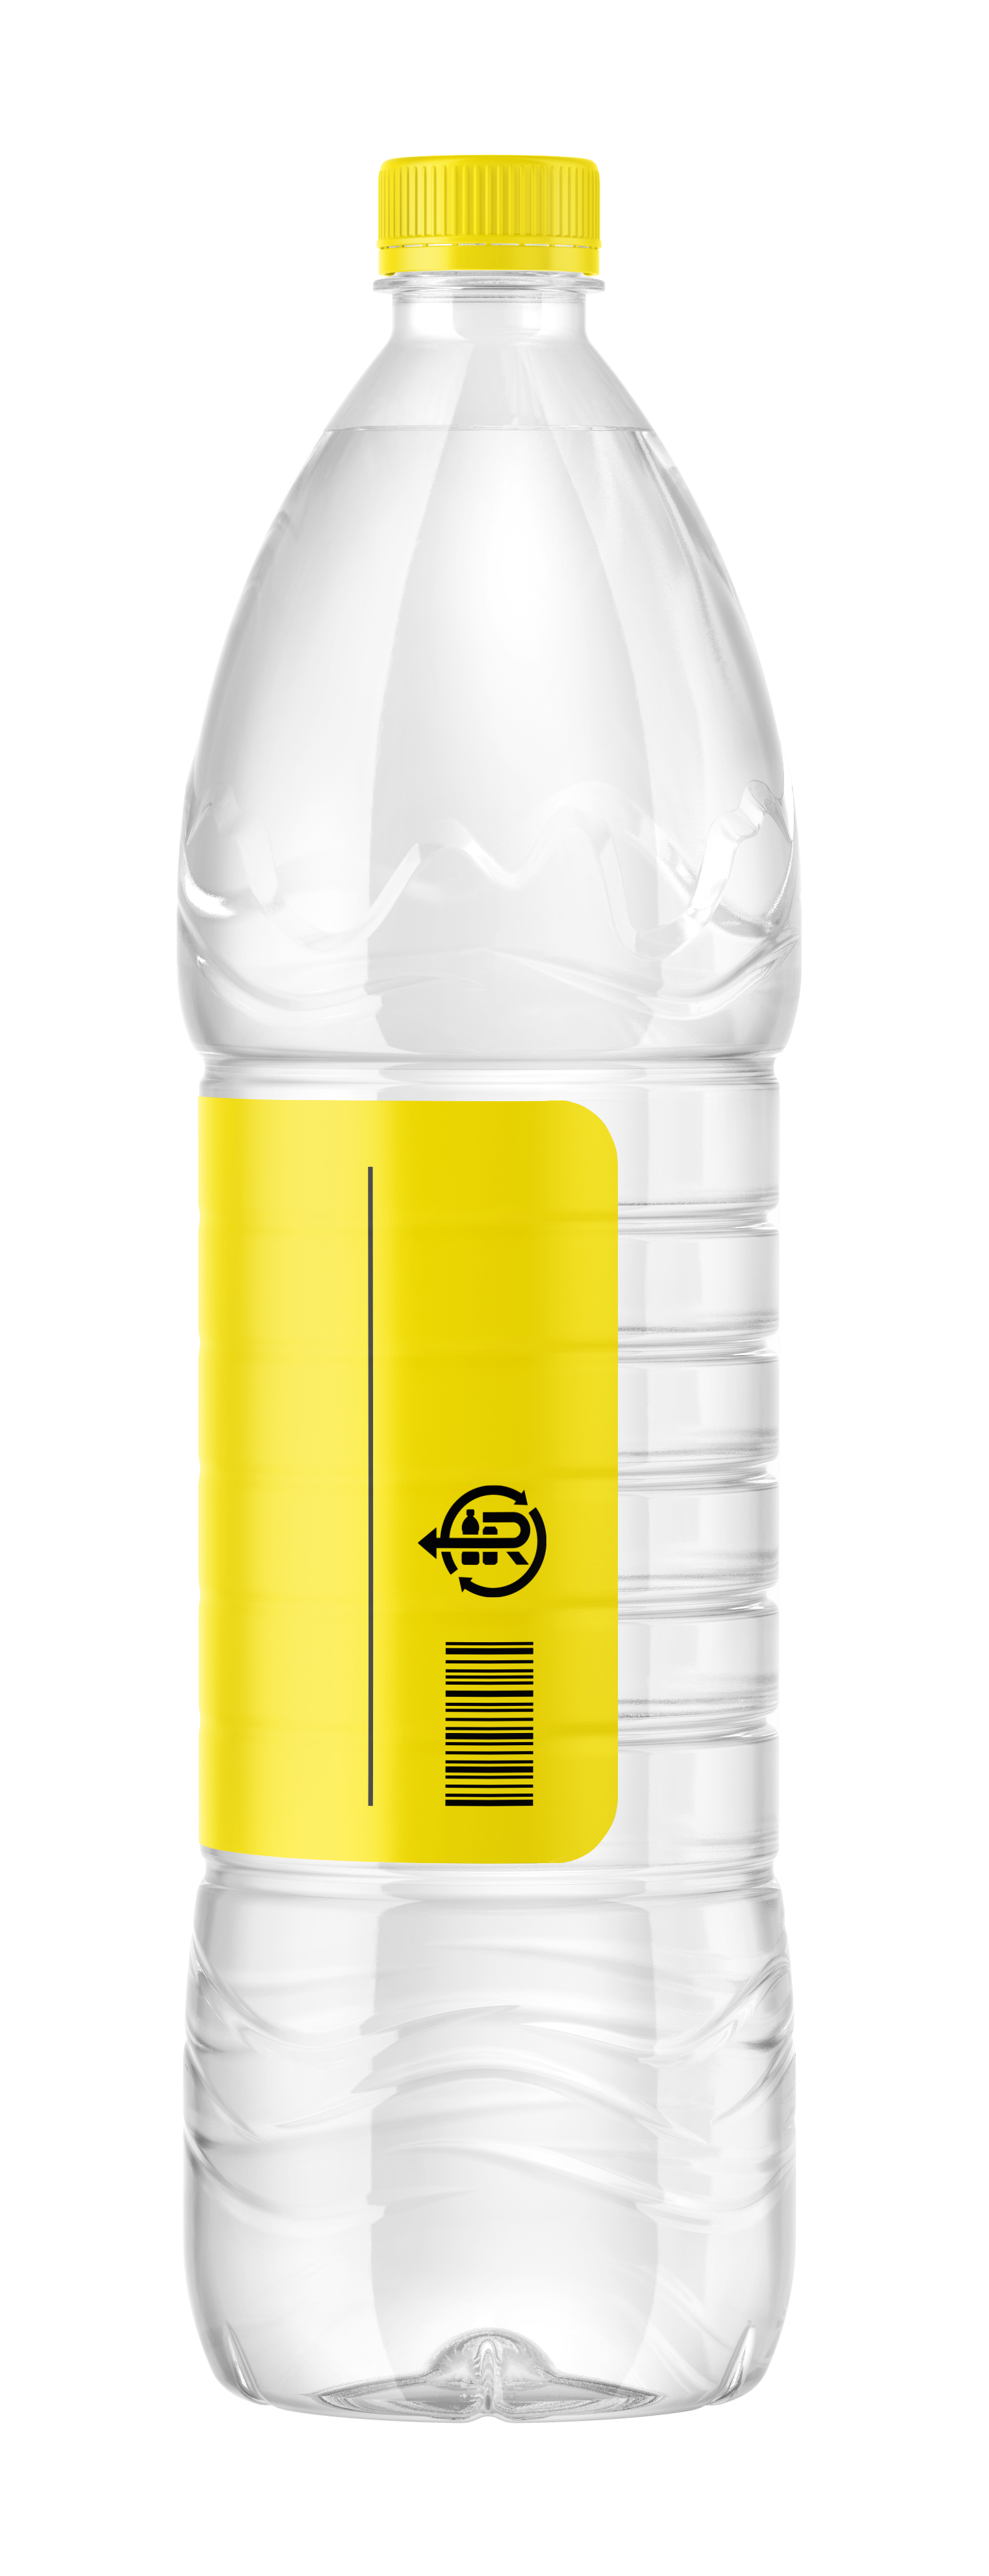 Example of plastic bottle graphic